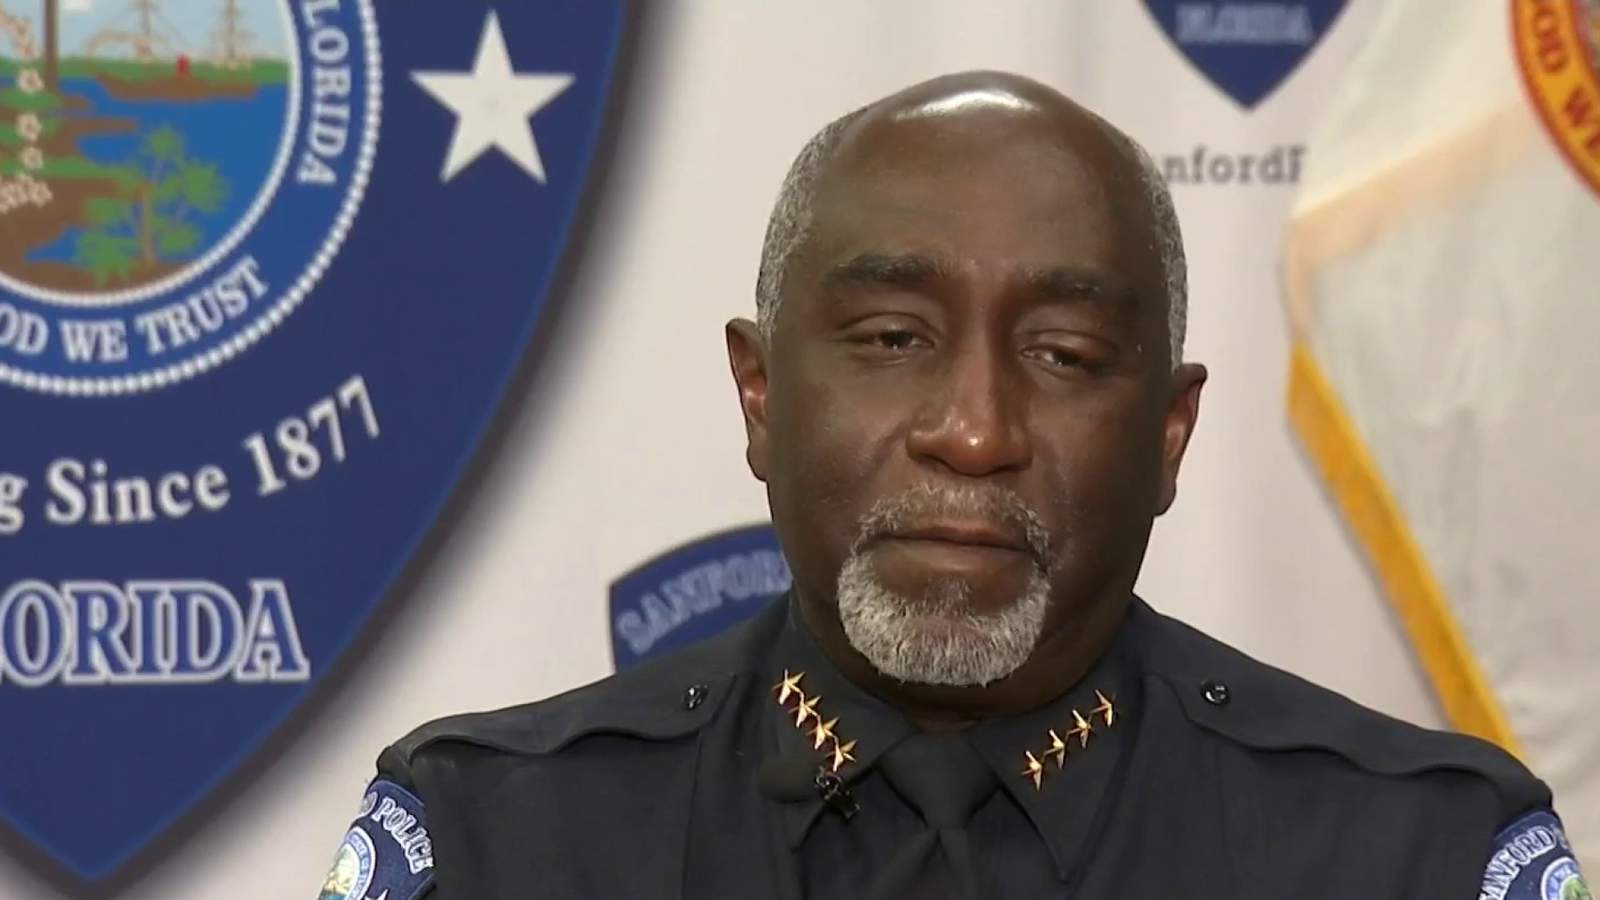 Sanford police chief shares lessons of healing, reconciliation after Trayvon Martin’s death